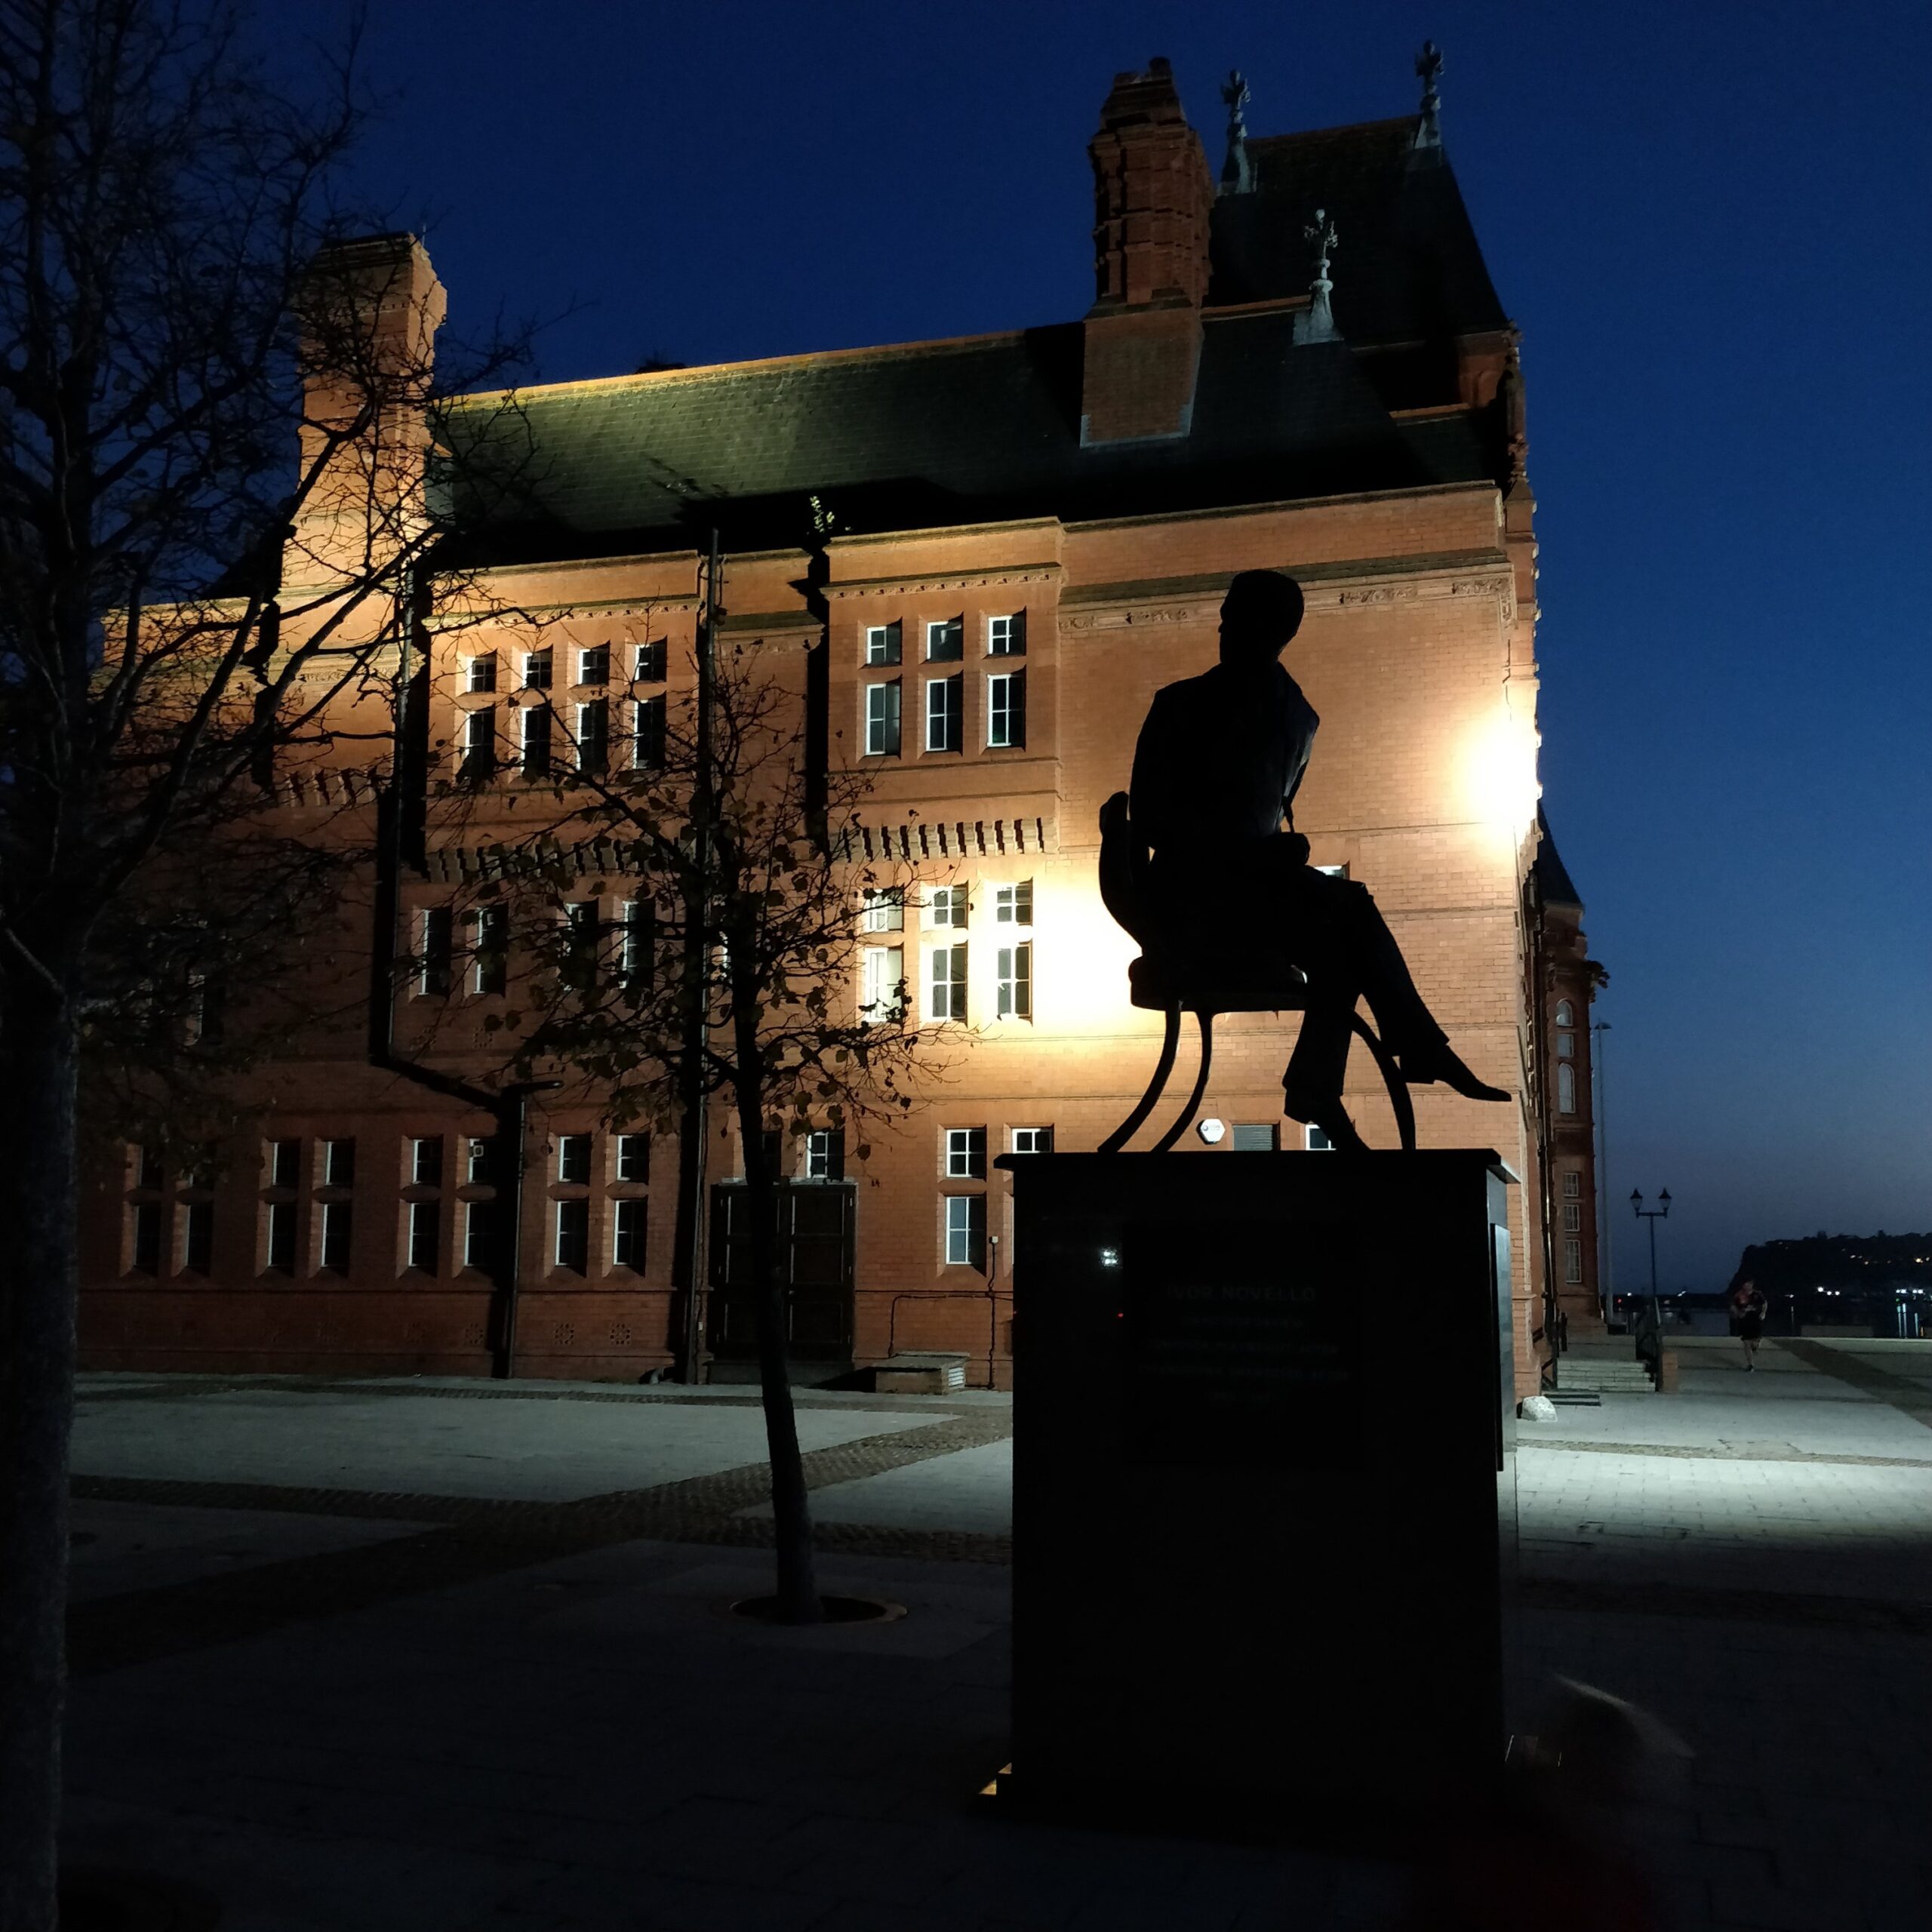 Ivor Novello statue, Bute Place, Cardiff – by night.